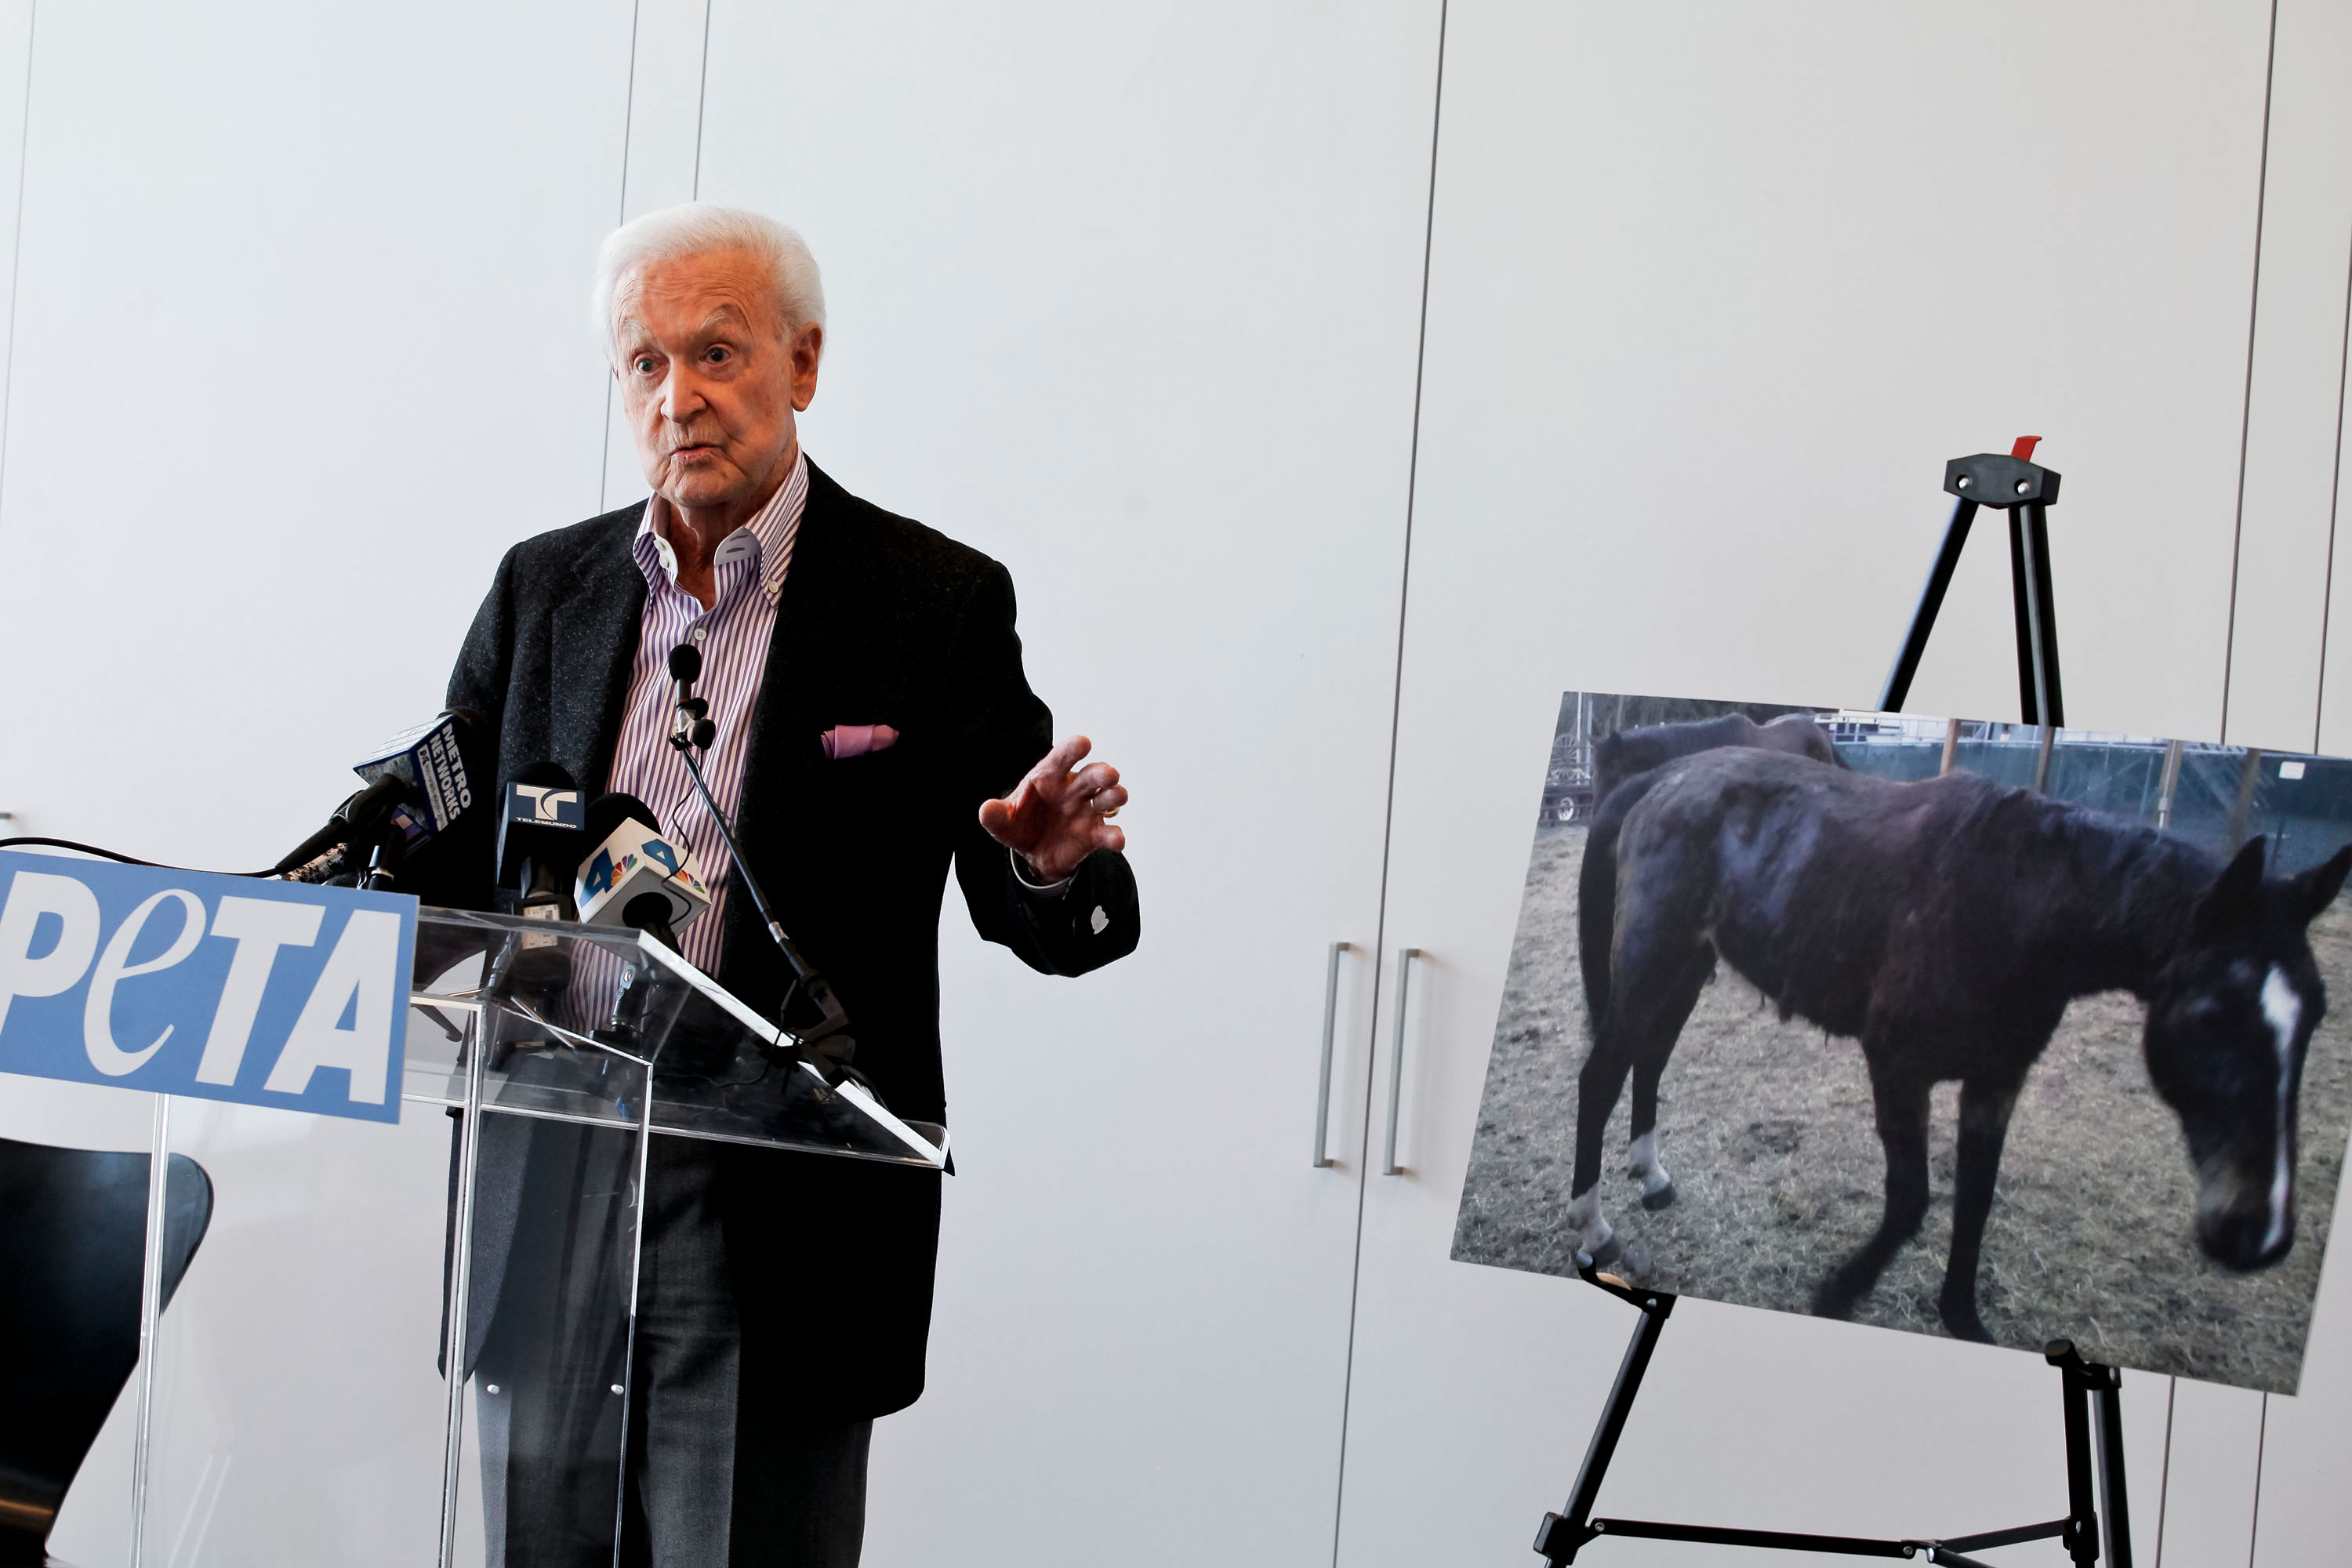 Bob Barker speaking at a conference he hosted to reform the "No Animals Harmed" movie label in Los Angeles, 2012 | Source: Getty Images